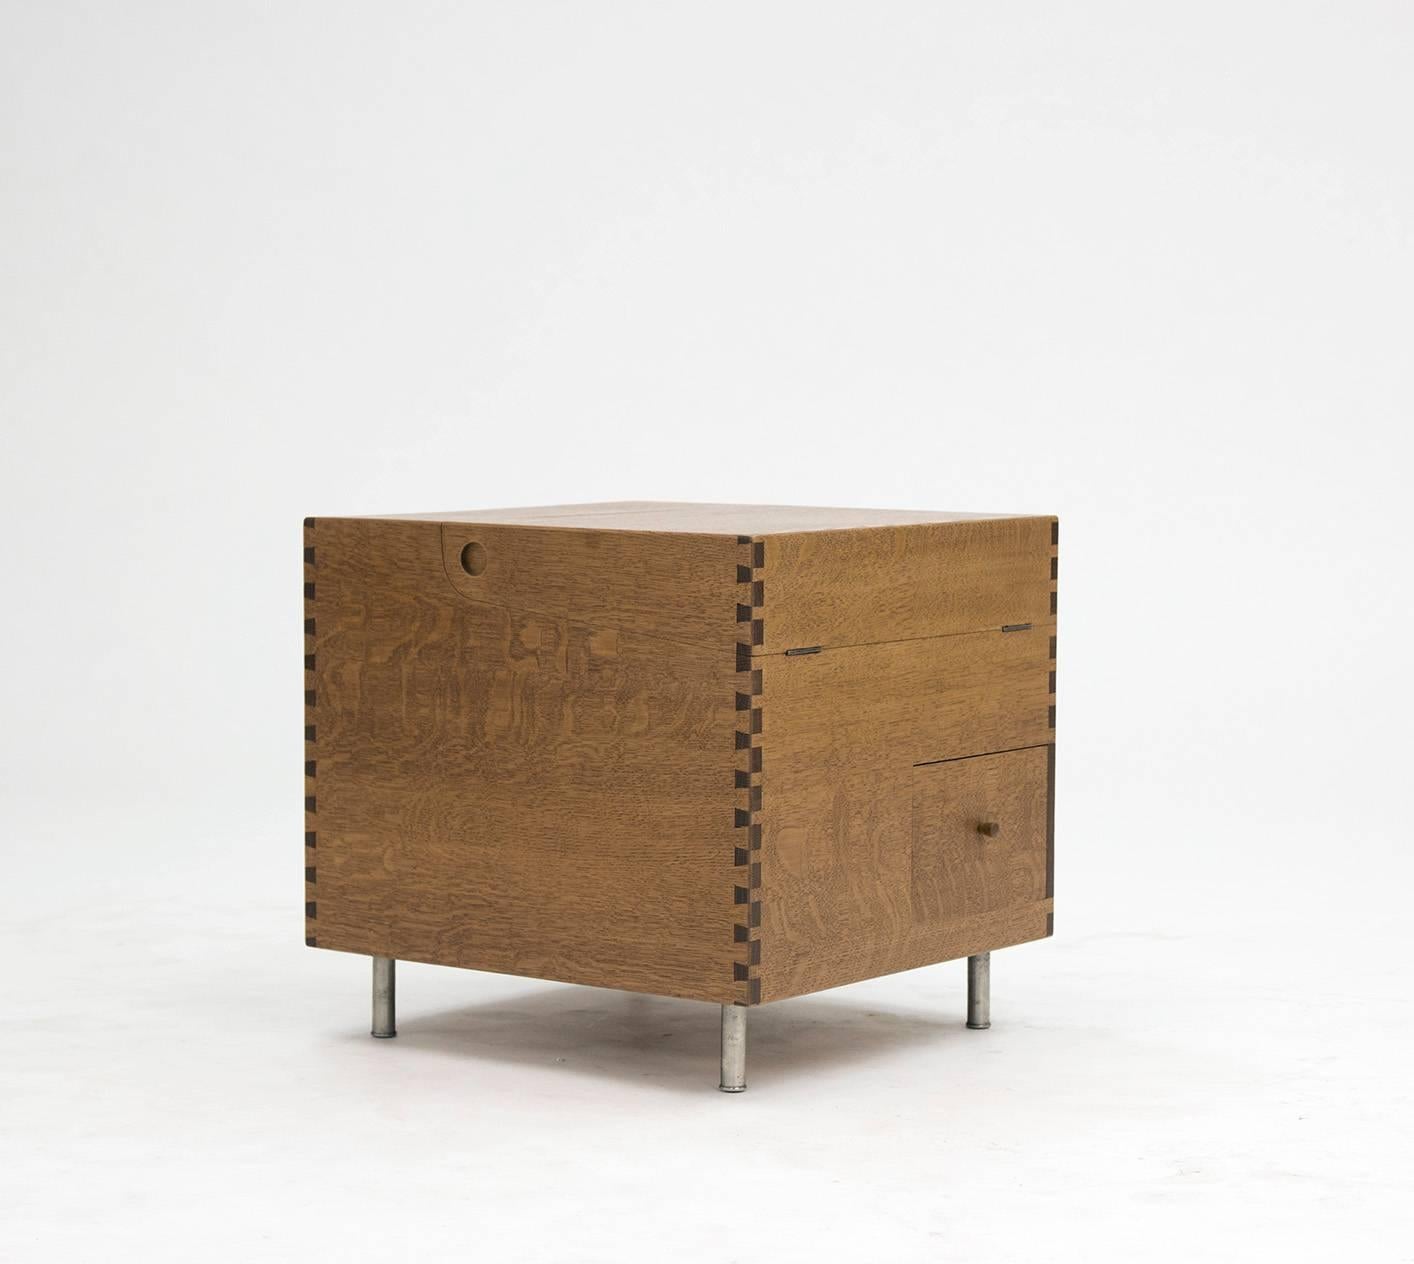 Amazing cubical bar cabinet, model "8034", by Hans J. Wegner. Made in oak with a striking pattern created at the joinery of the sections. Has one-drawer and two compartments inside. Original steel legs.